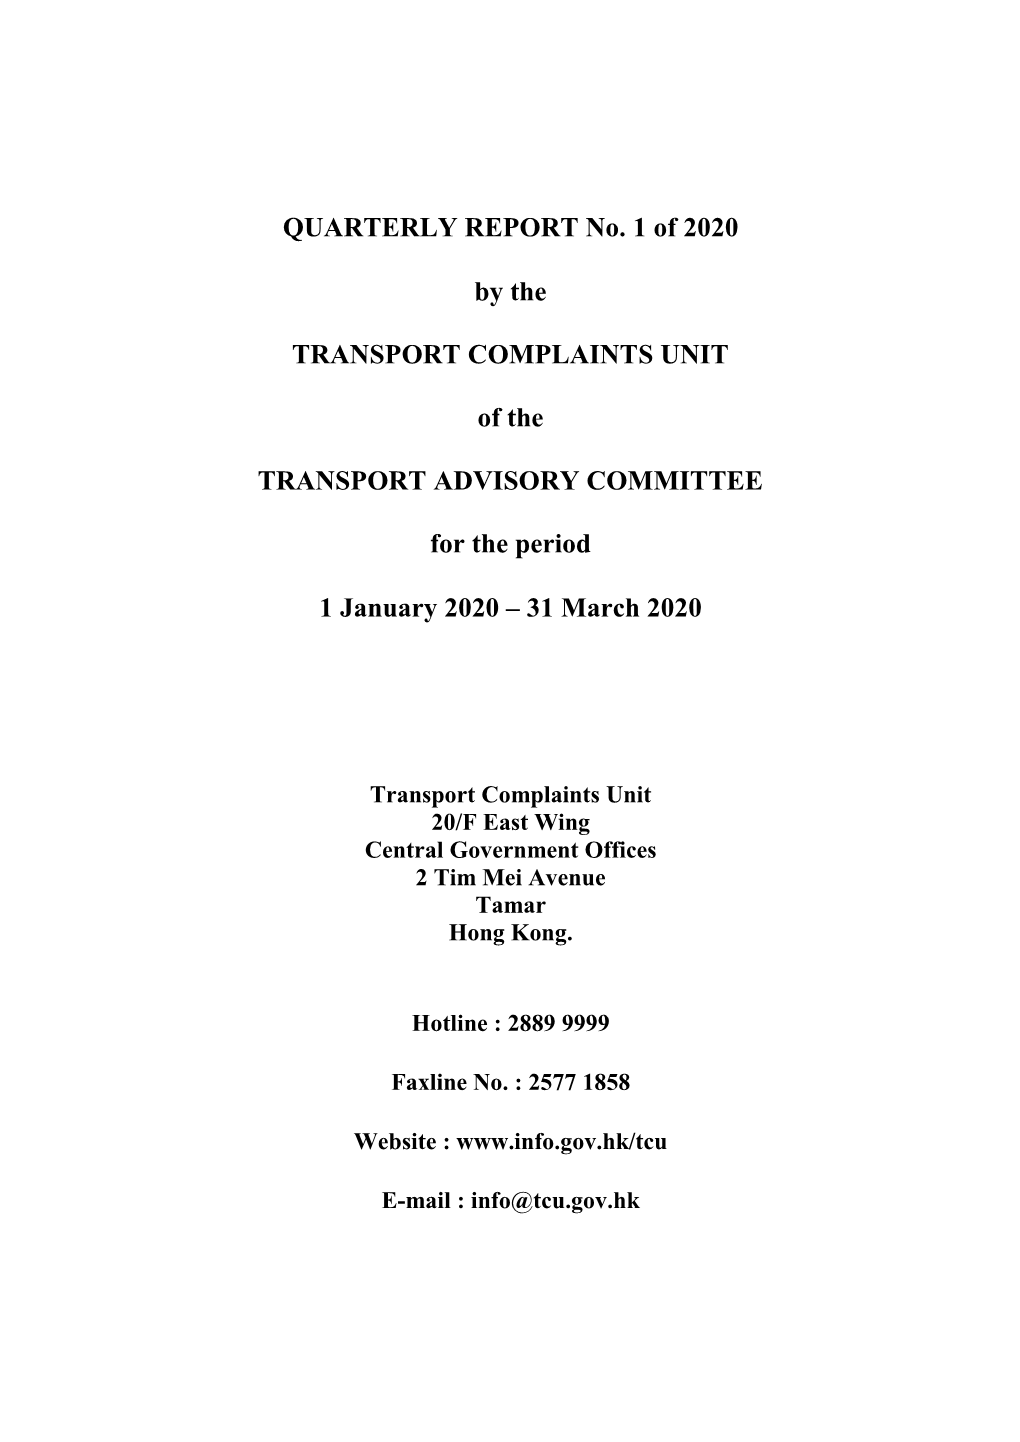 QUARTERLY REPORT No. 1 of 2020 by the TRANSPORT COMPLAINTS